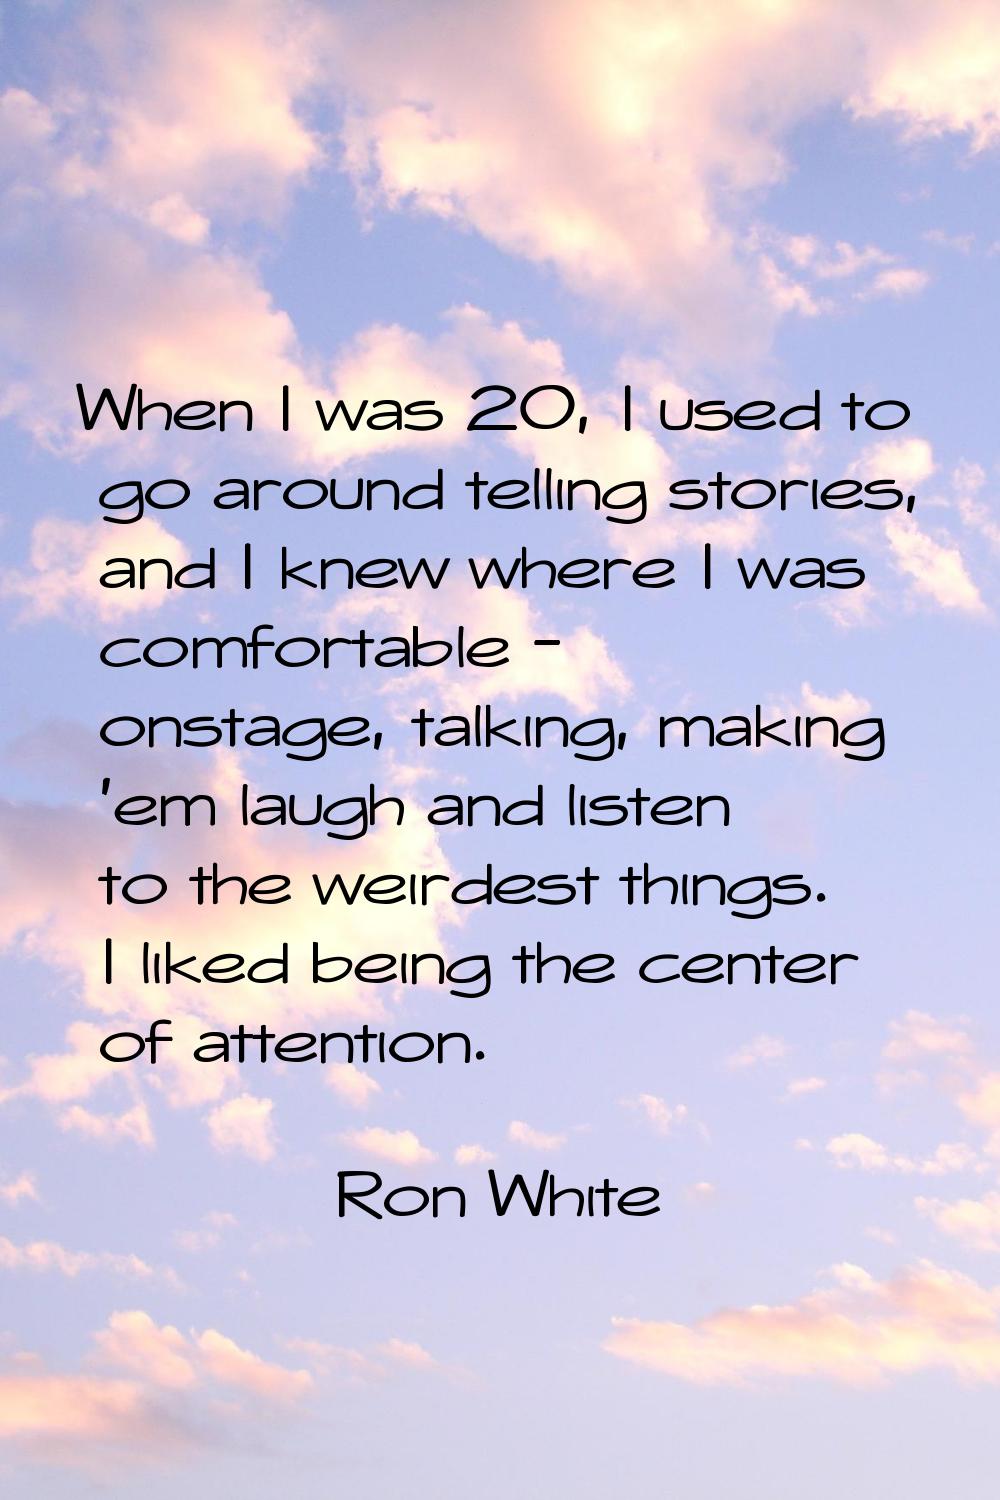 When I was 20, I used to go around telling stories, and I knew where I was comfortable - onstage, t